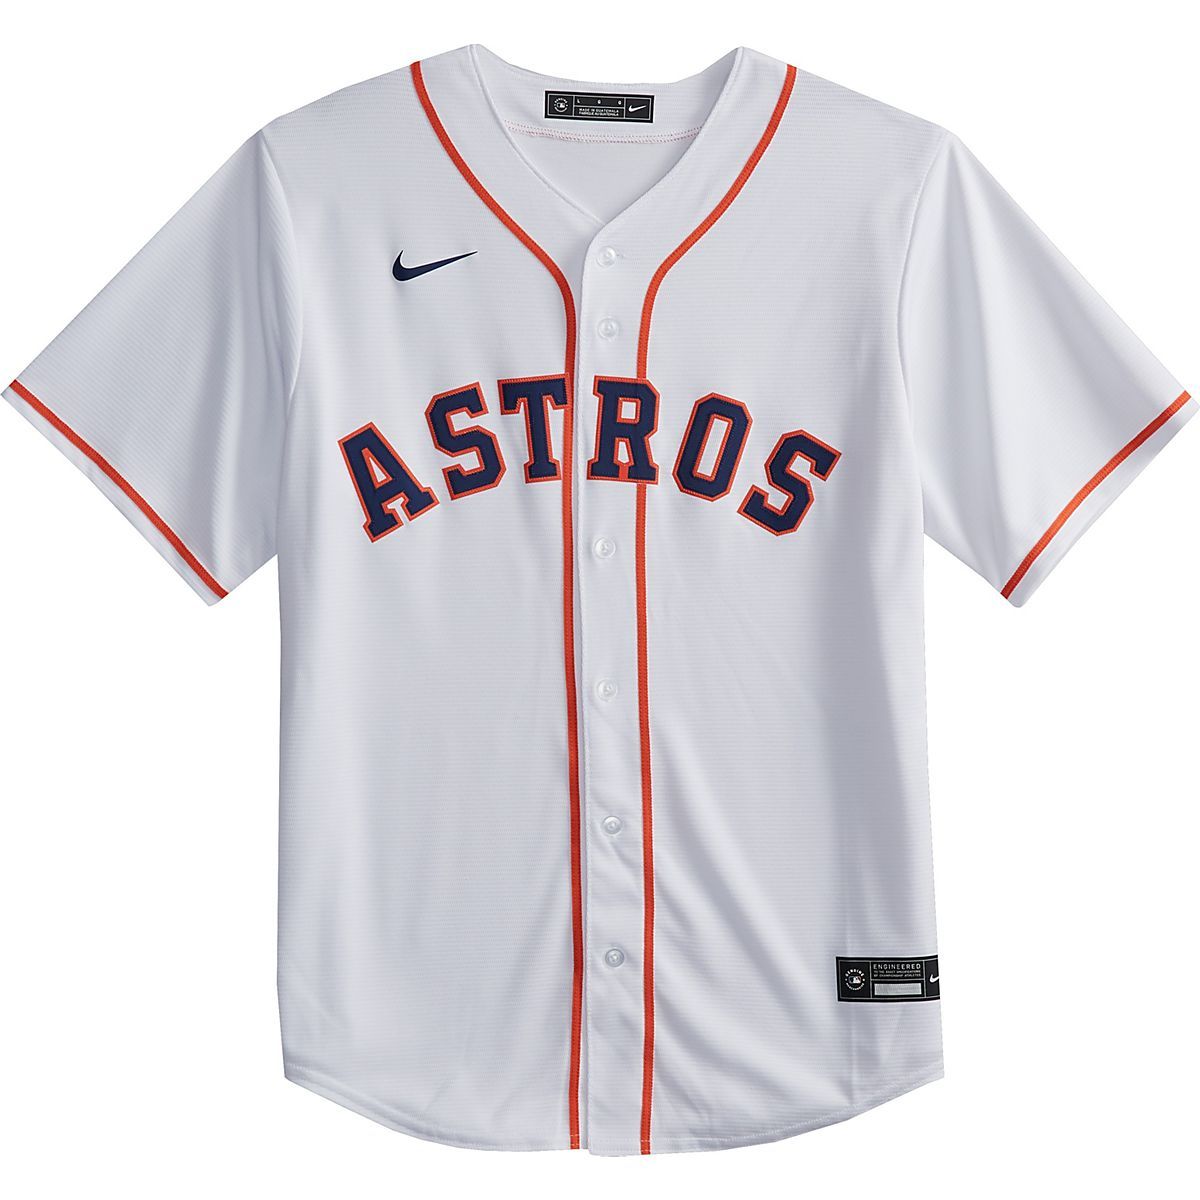 Nike Men's Houston Astros Blank Official Replica Home Jersey | Academy Sports + Outdoors